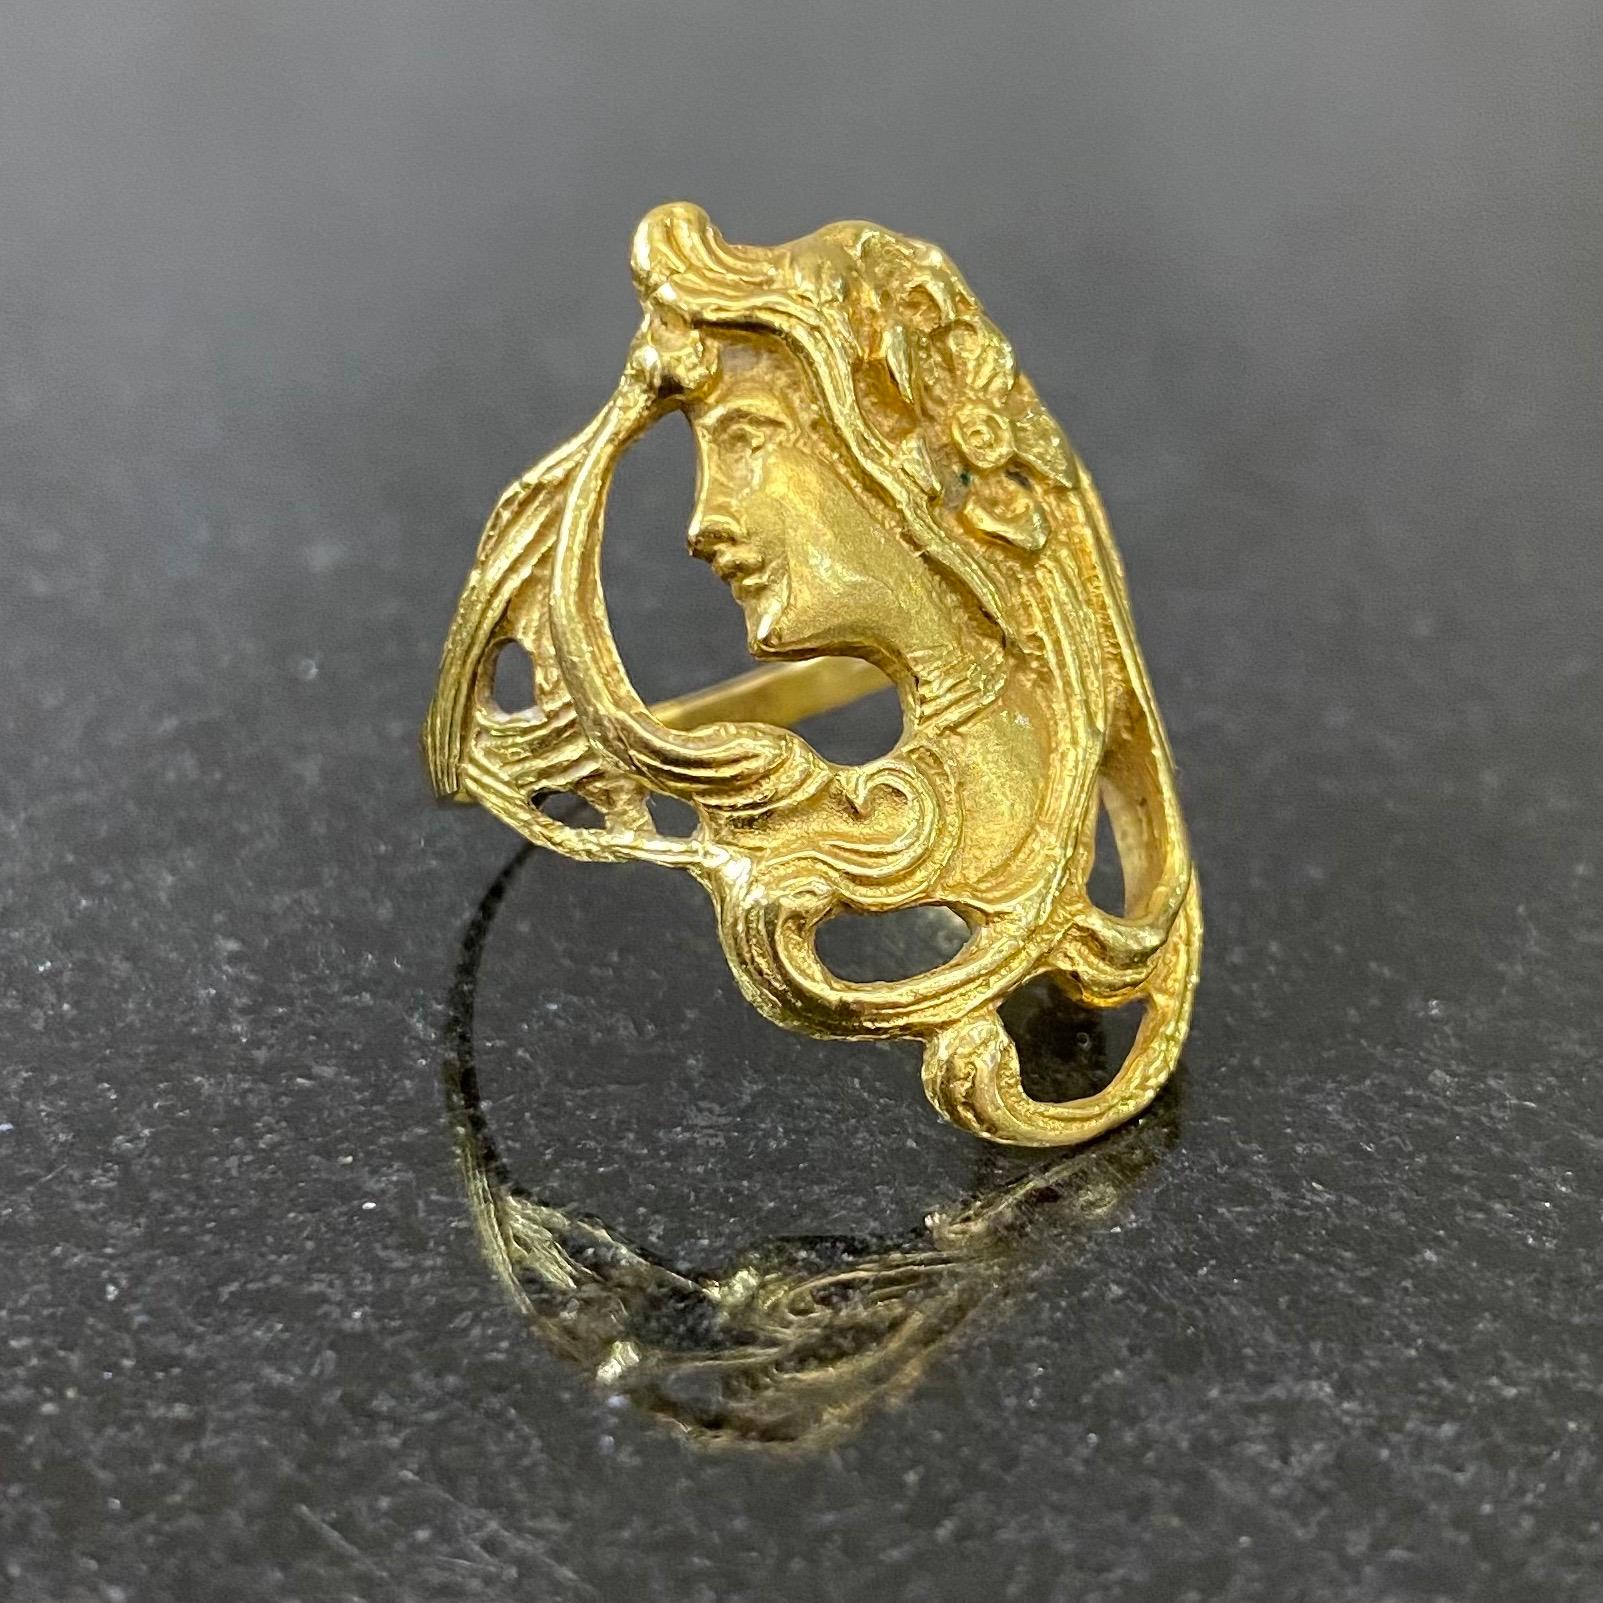 Vintage Art Nouveau Style Female Figure Ring in 19.2 Karat Yellow Gold, Signed, Portugal, 1980s. This openwork carved ring is modelled as a woman in profile looking to the left, her hair dancing in the wind and embellished with a flower, flowing